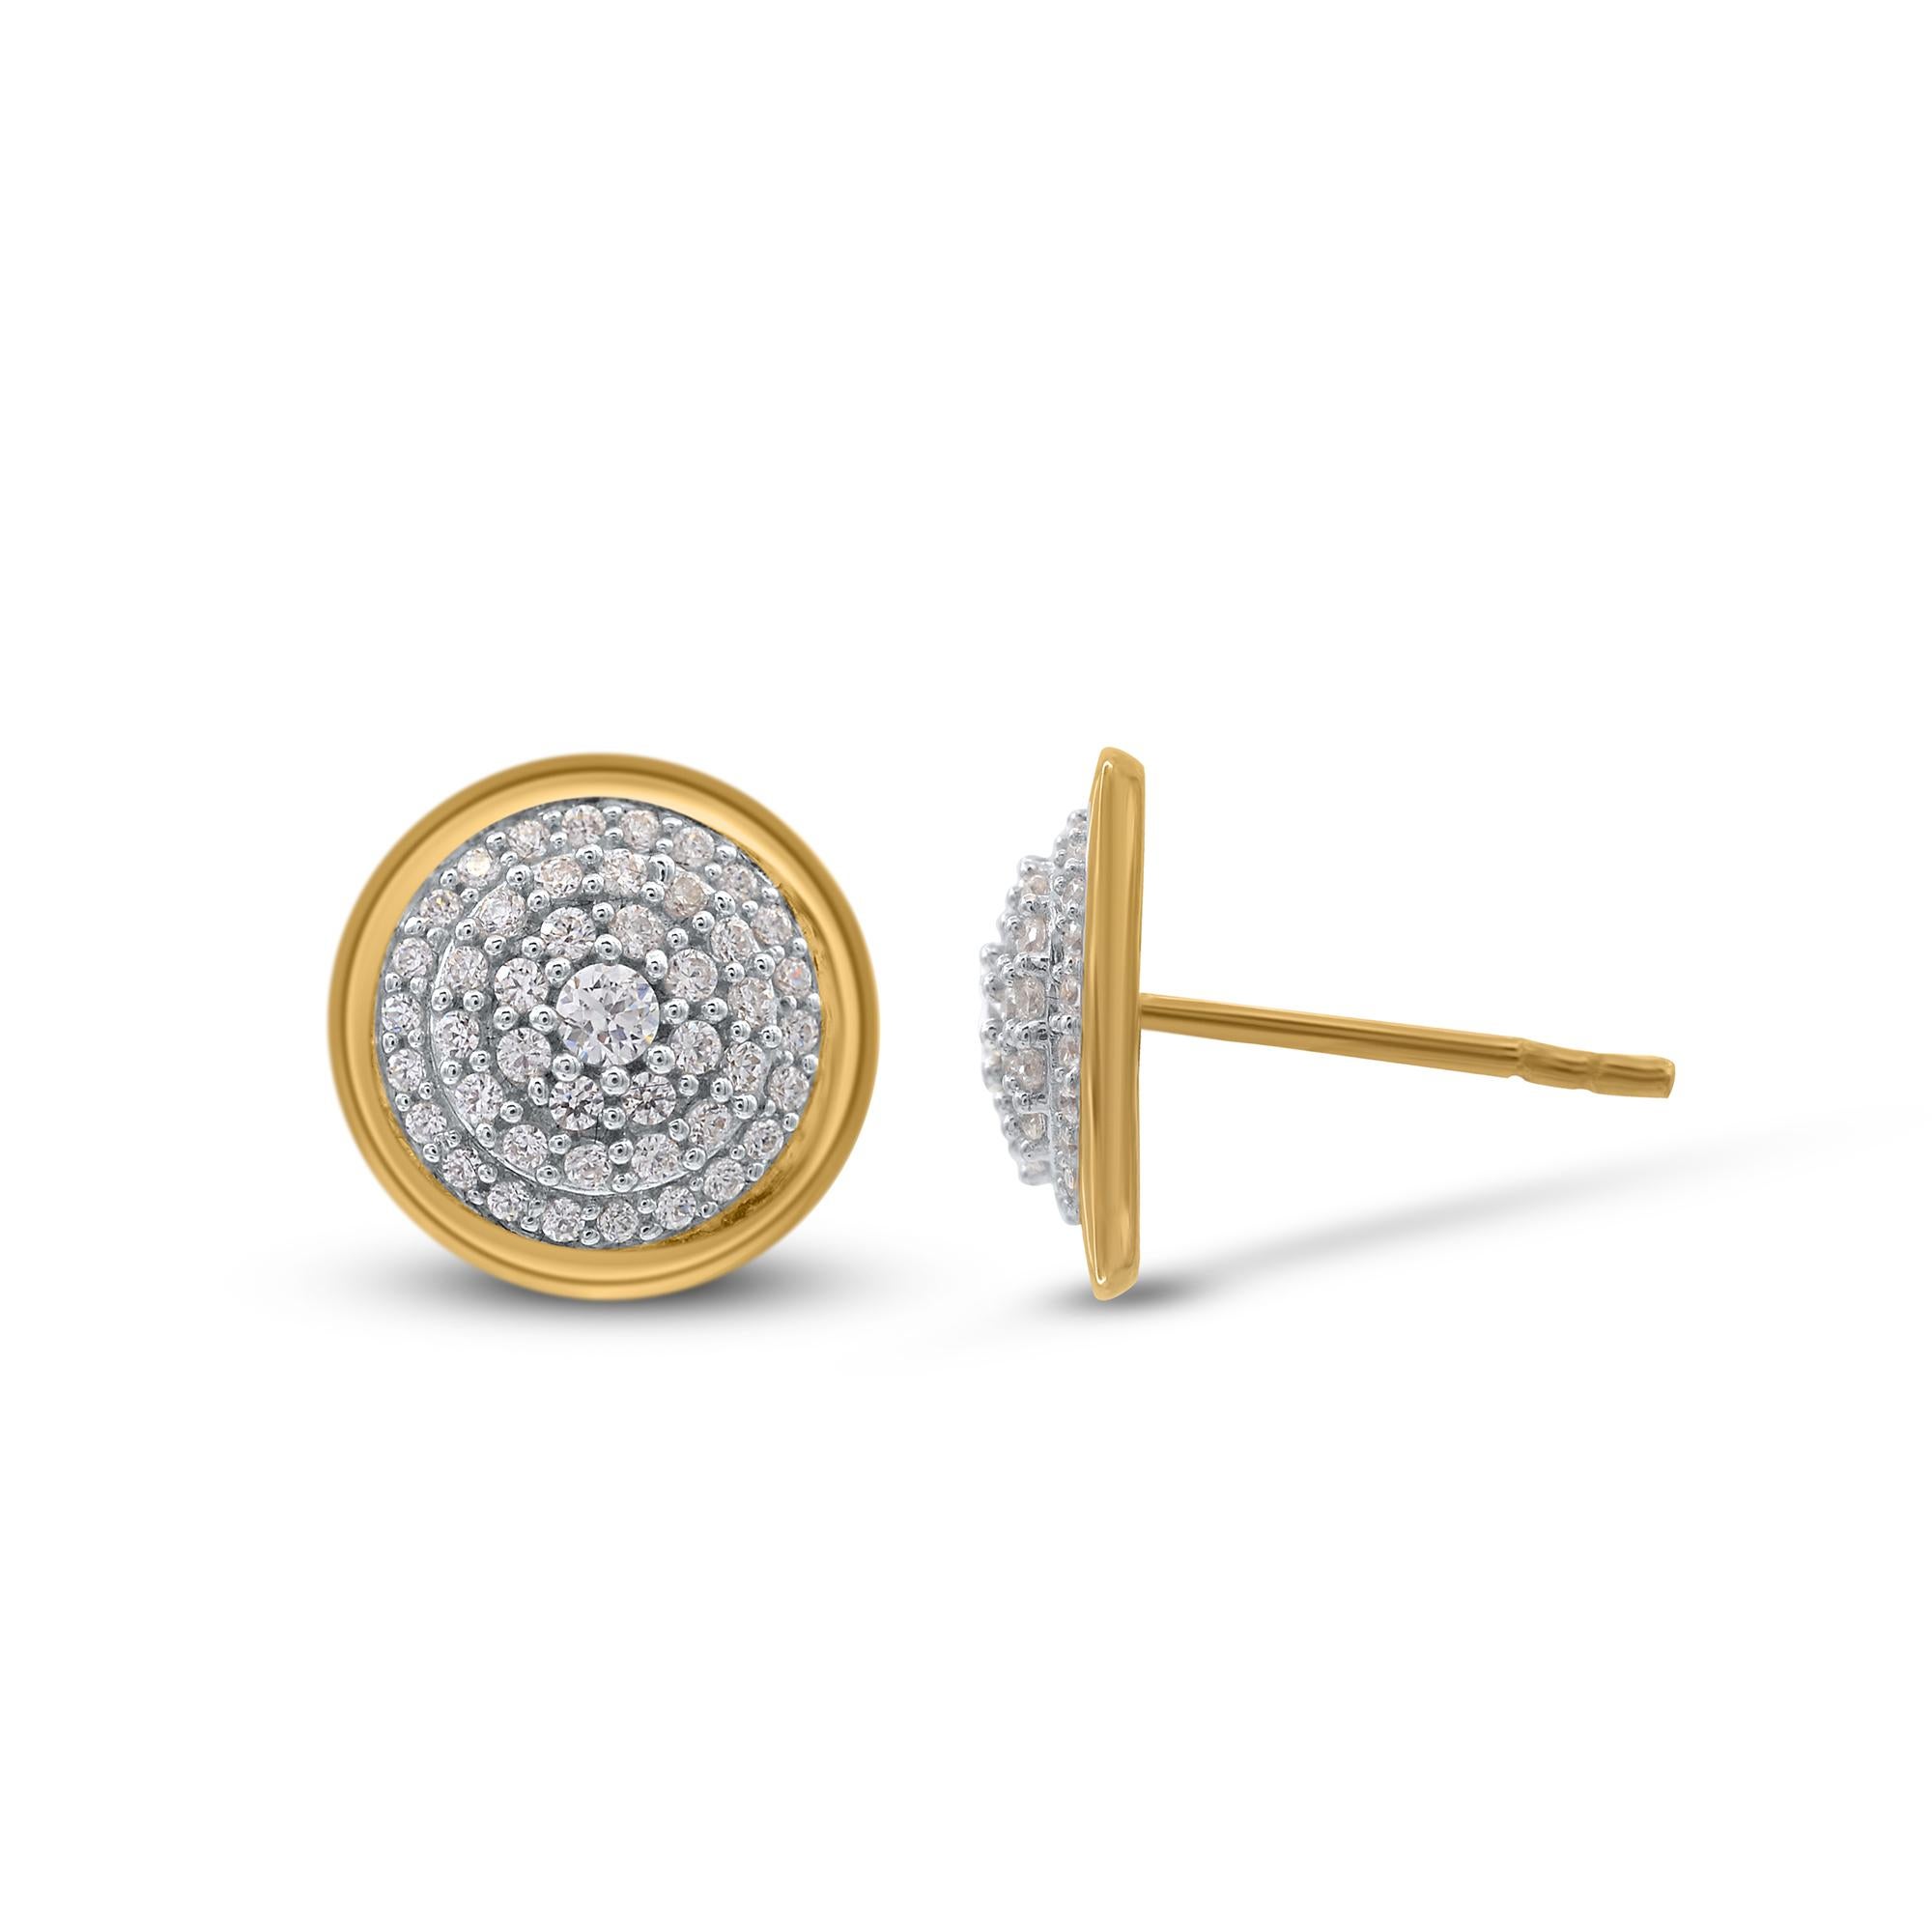 Timeless and elegant, these diamond stud earring are a style you'll wear with every look in your wardrobe. This earring is beautifully designed and studded with 90 natural brilliant cut diamond and single cut round diamonds set in prong setting. We